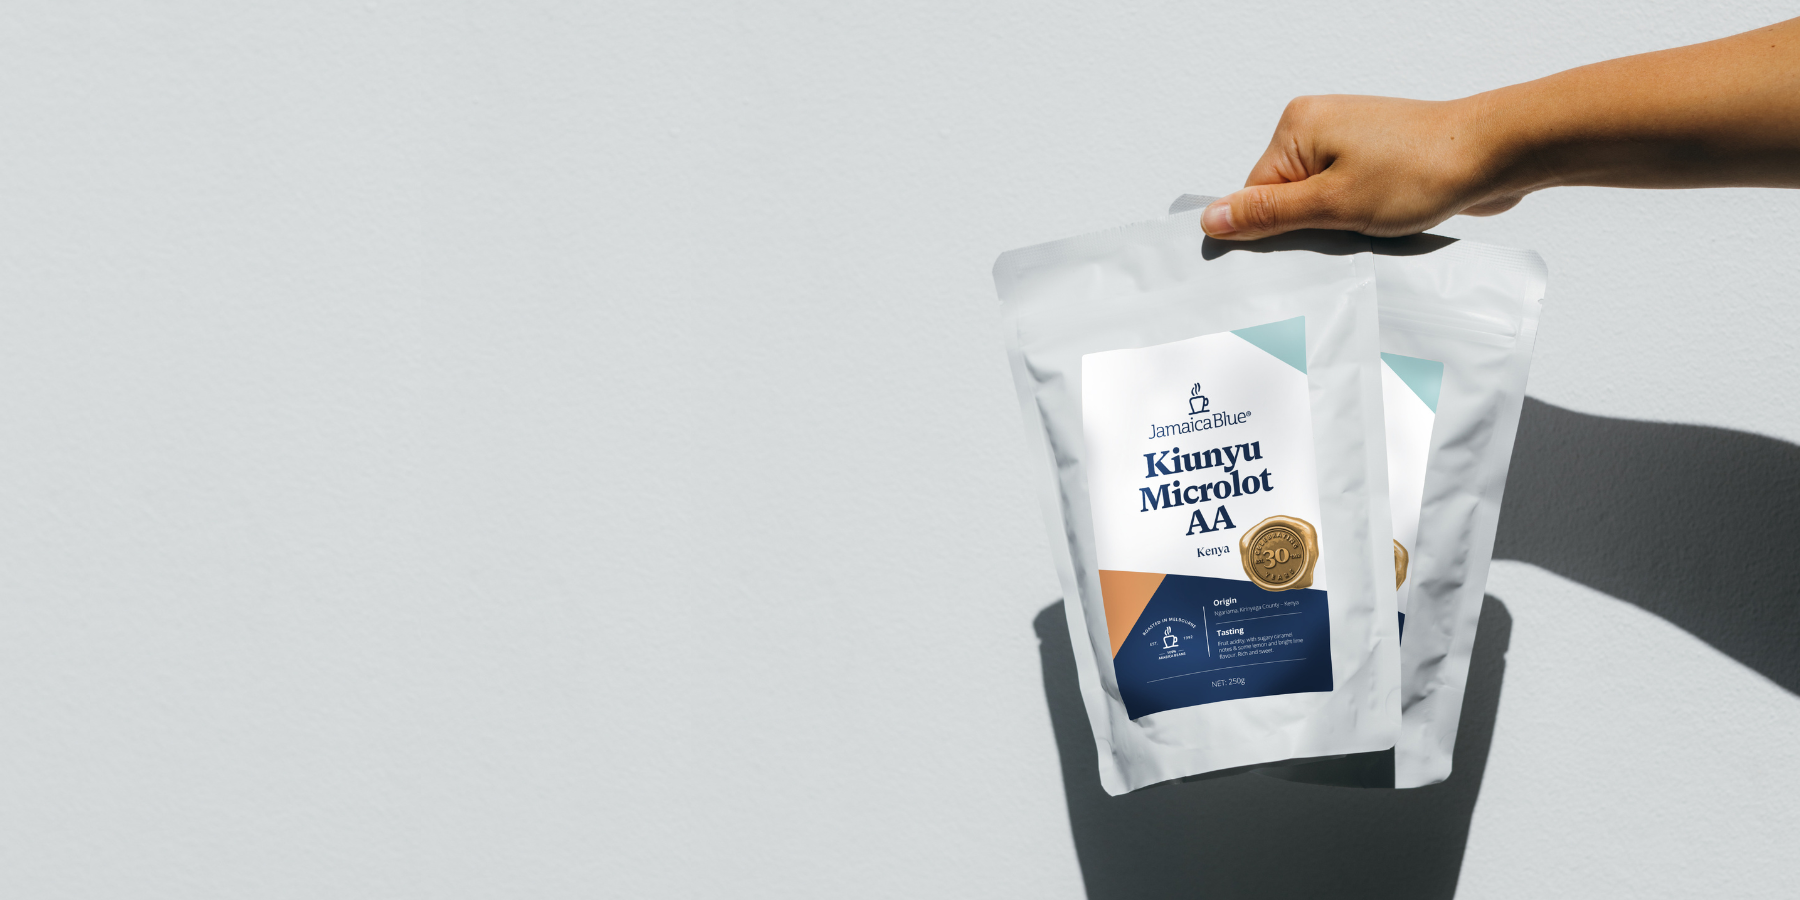 Celebrating 30 years of Jamaica Blue with our new Kenyan Single Origin Coffee